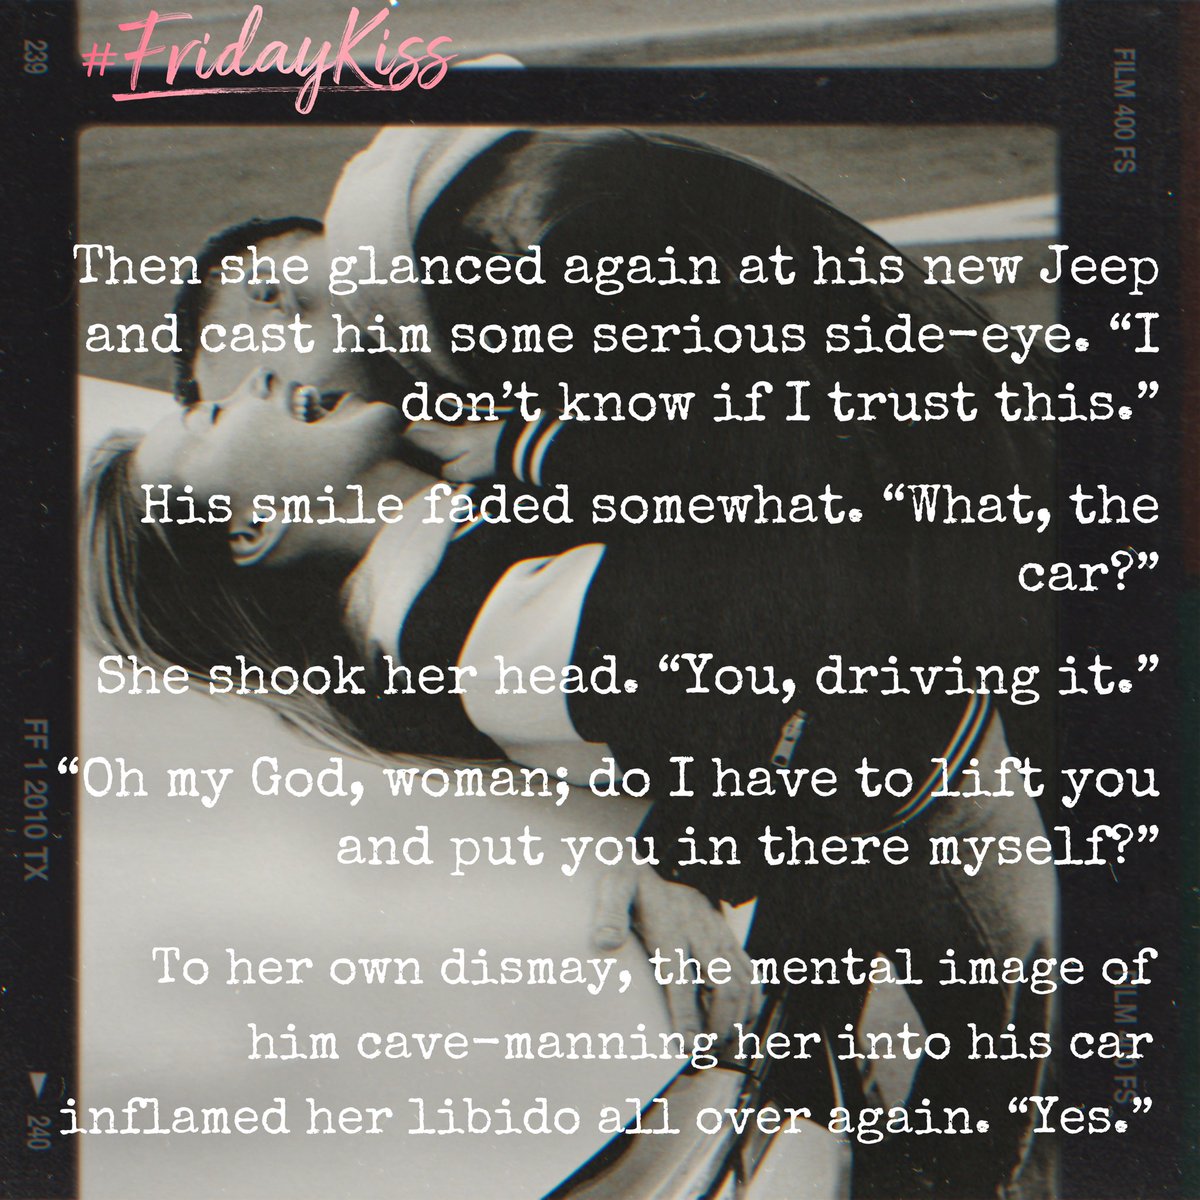 #FridayKiss from THE HOLD, my upcoming sequel to The Catch. The #WordPrompt is IMAGE. ❤️ #wip #workinprogress #bookseries #RomanceBook #contemporaryromance #contemporaryromancebook #romancereads #contemporaryromancereads #romancereader #ContemporaryRomanceReader #readromance